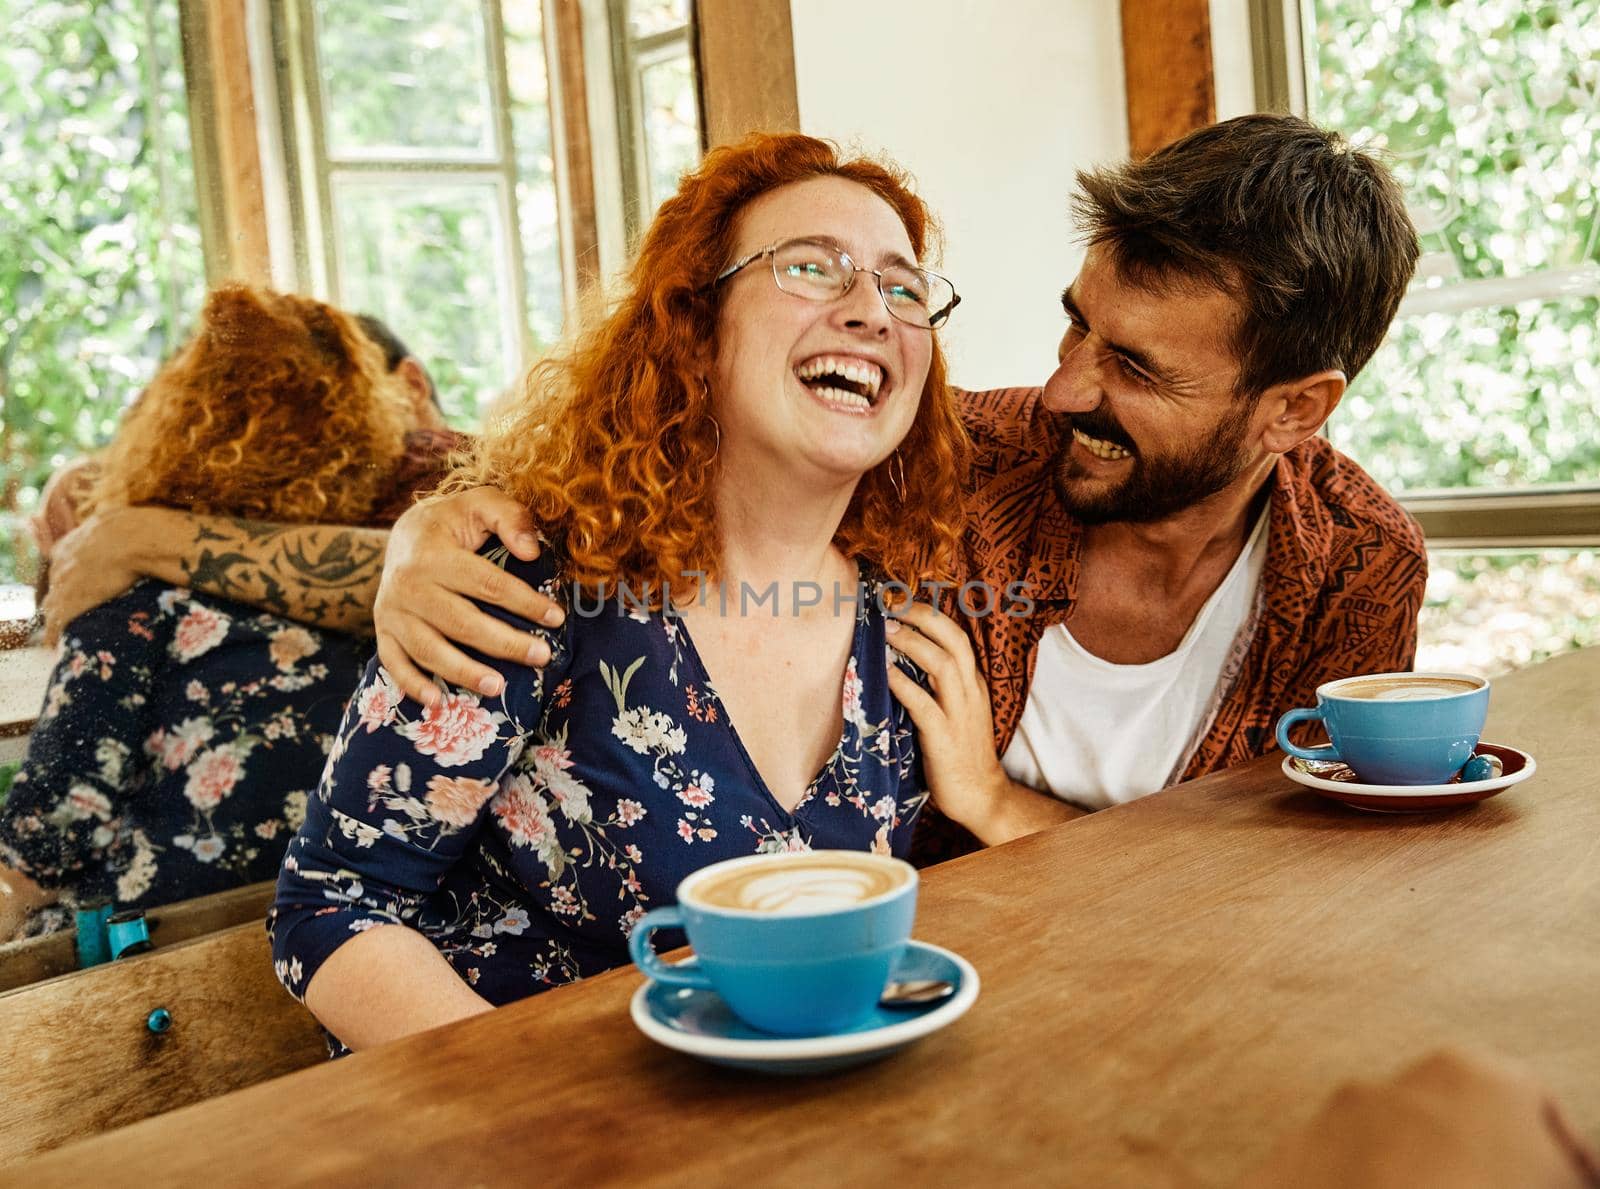 fun woman man couple cafe lifestyle happy together smiling love cheerful coffee shop by Picsfive